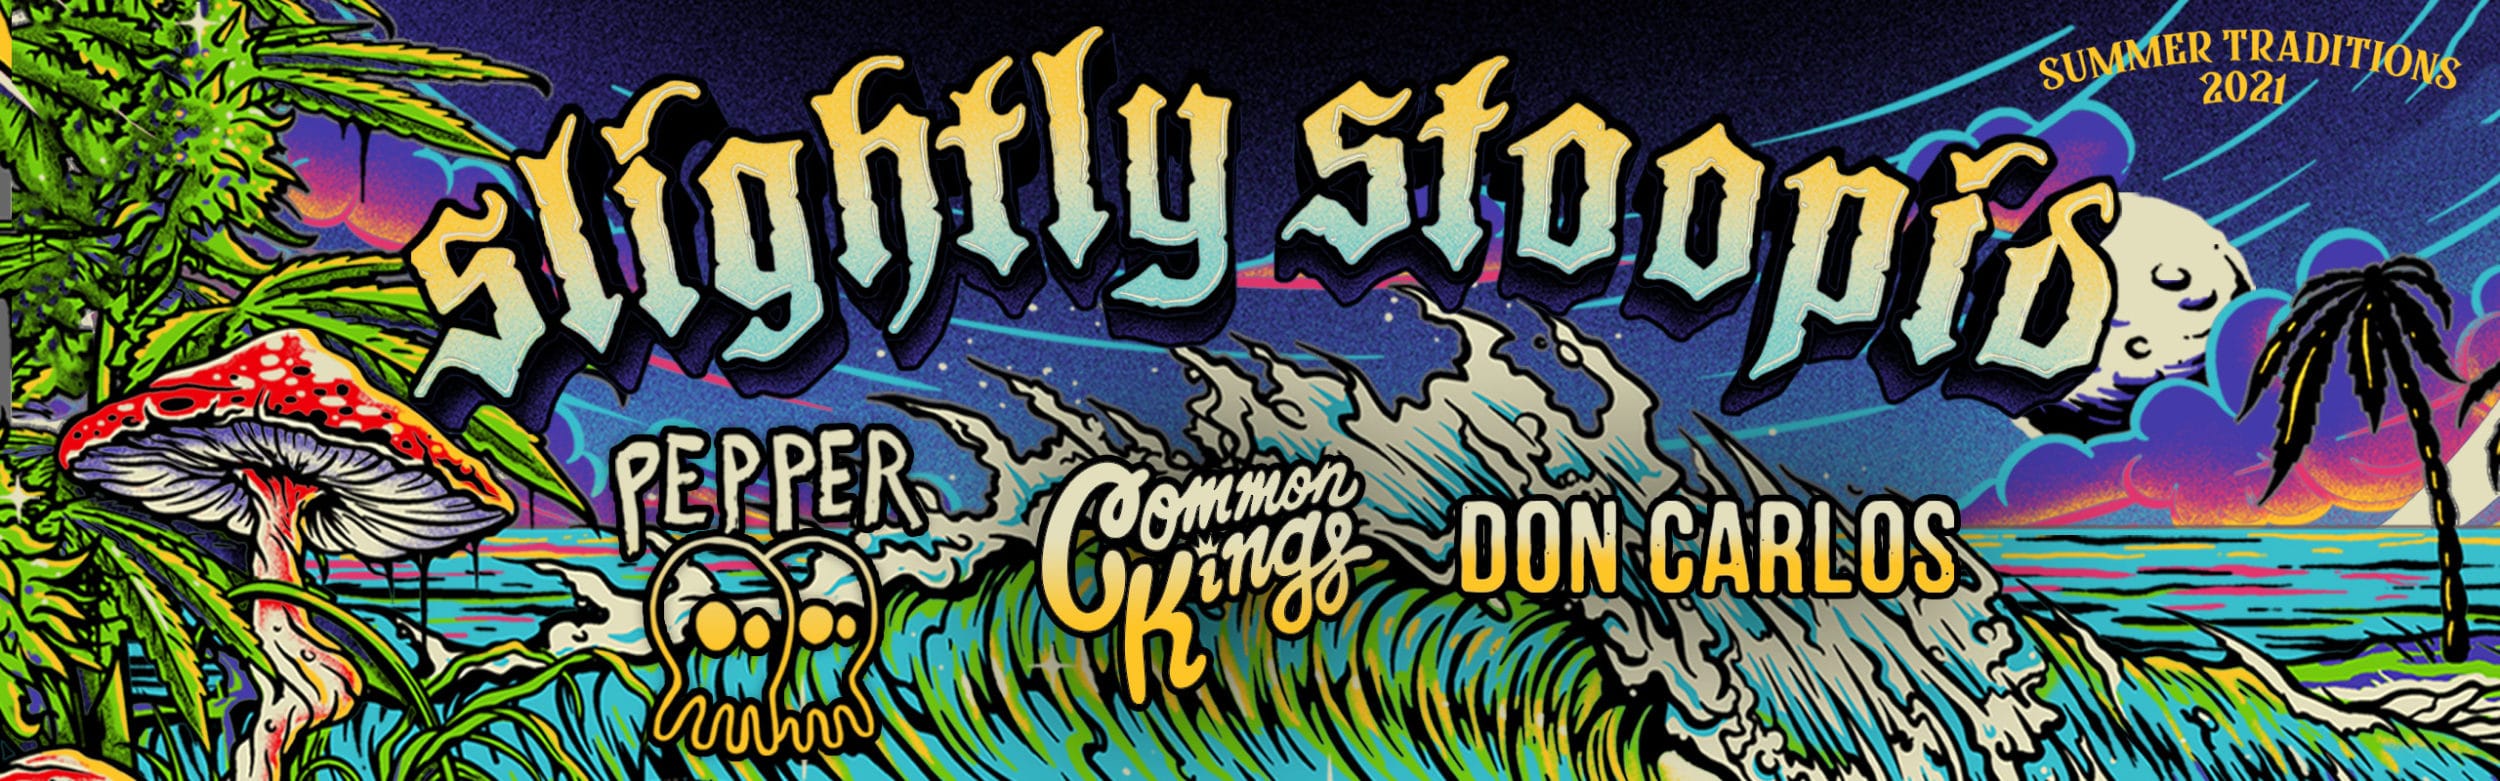 Slightly Stoopid: Summer Traditions 2021 with Pepper, Common Kings and Don Carlos